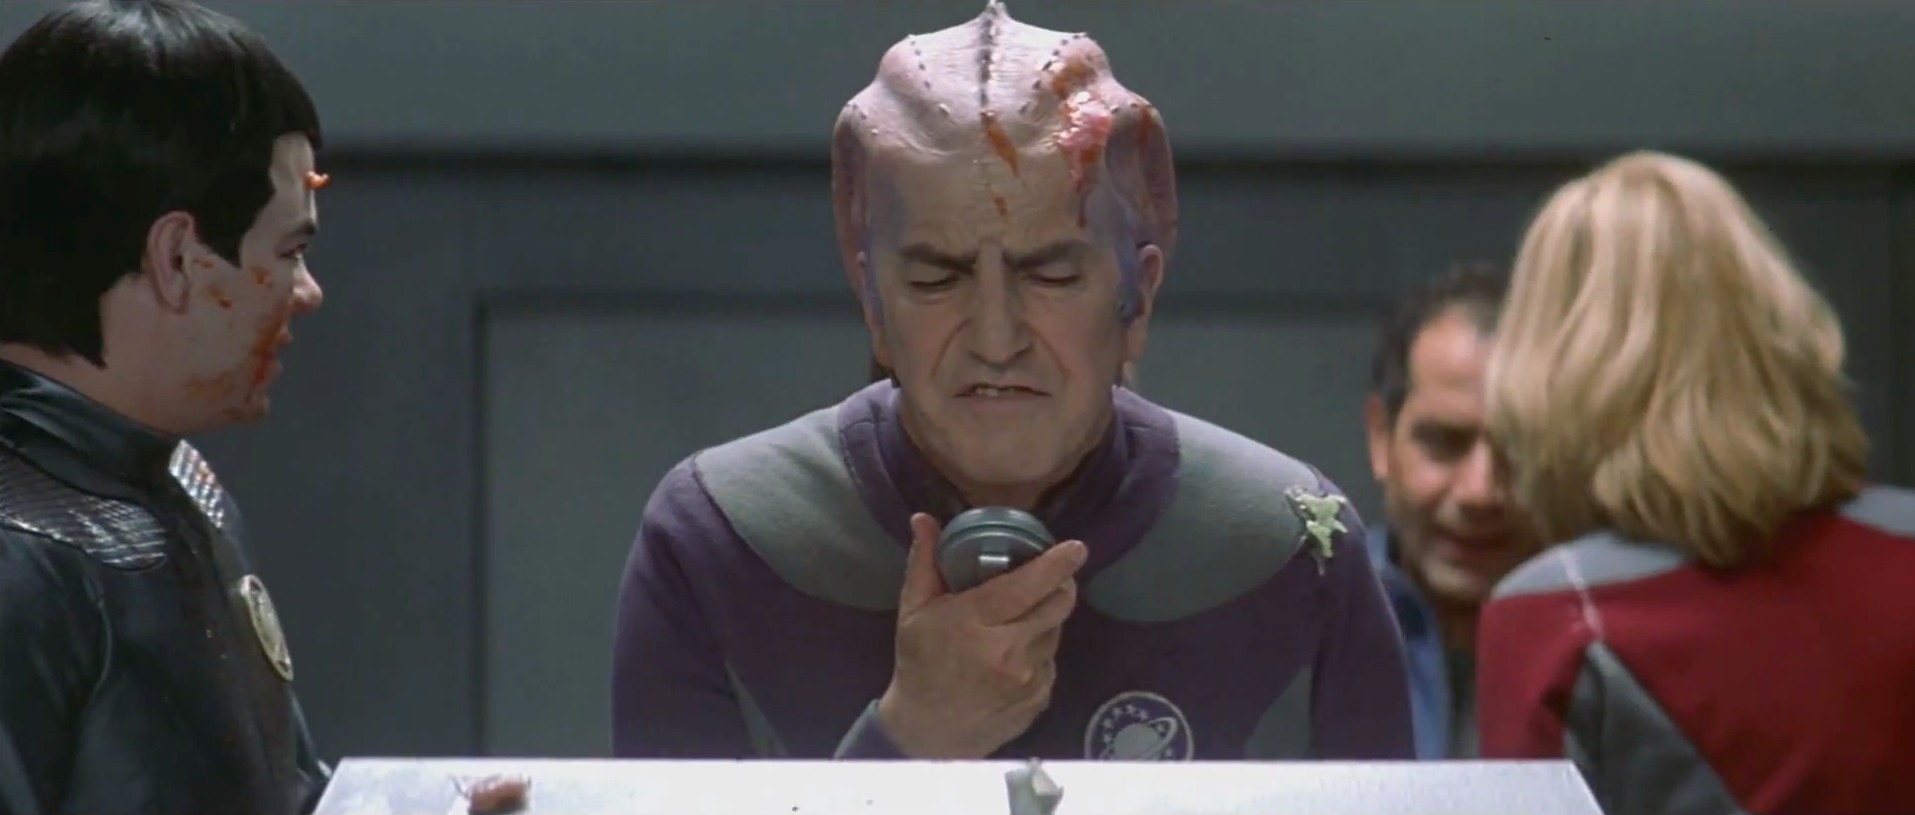 Galaxy Quest (1999): Alan is the bitter, insecure, prosthetically-enhanced jewel at the center of this shit show/crown. He's angsty and fucking magnificent.